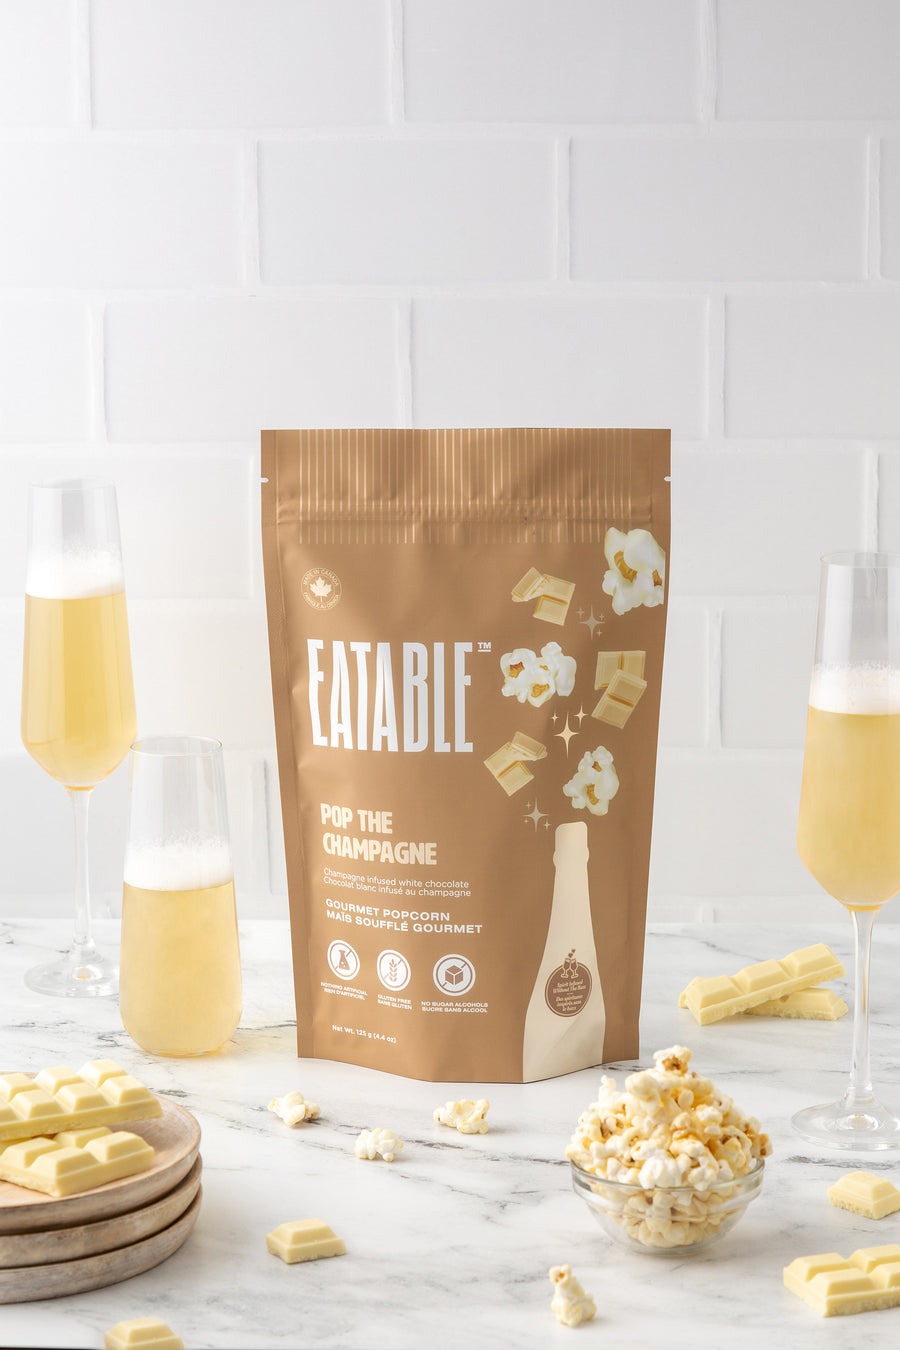 Pop the Champagne (125 g) - Case of 12 - EATABLE Popcorn